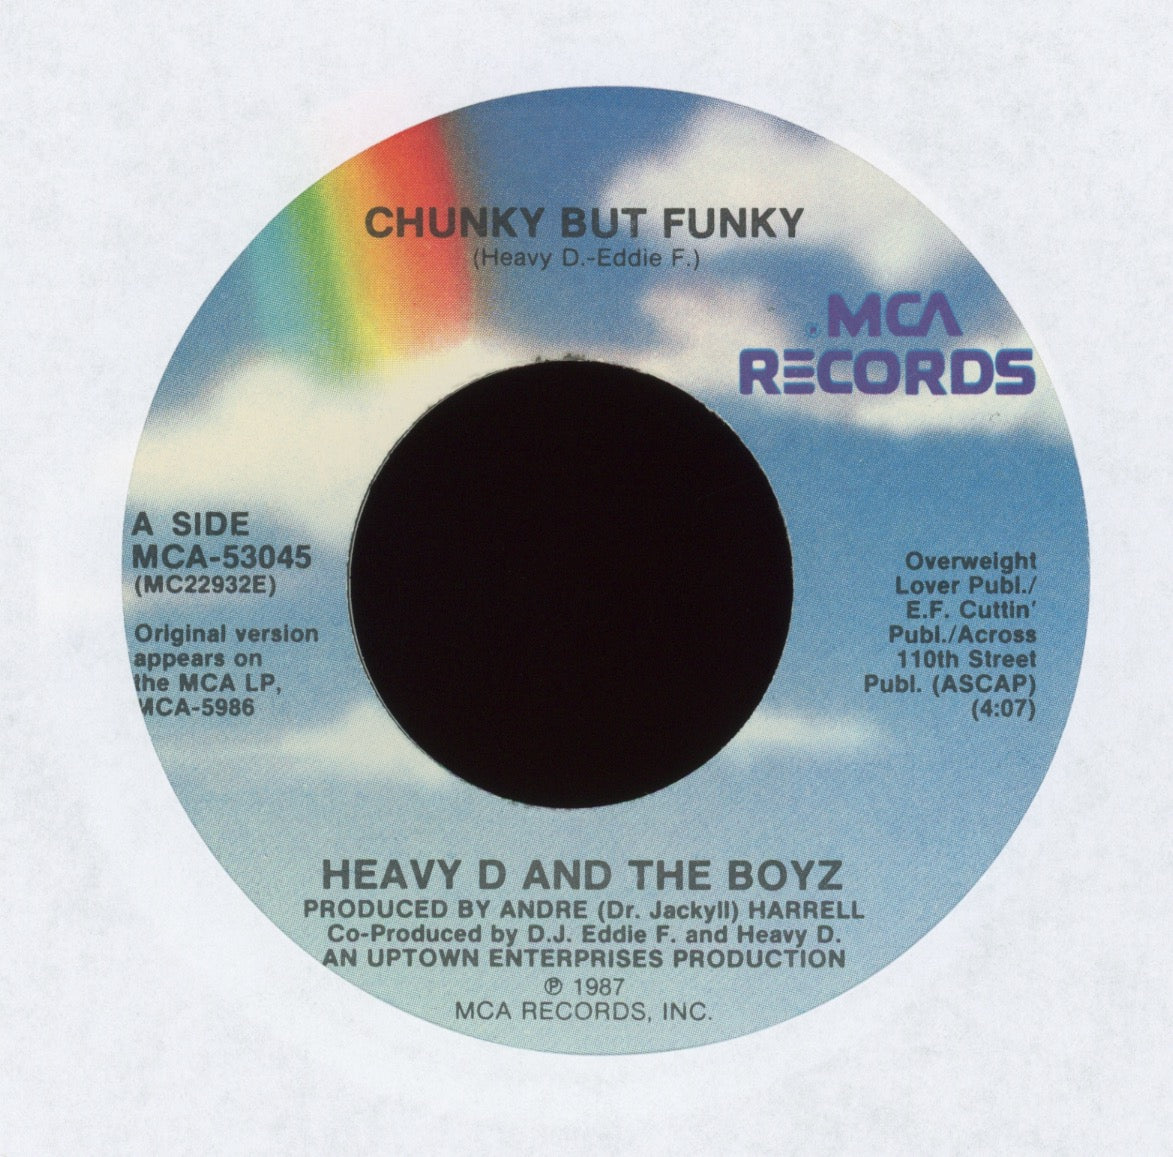 Heavy D. & The Boyz - Chunky But Funky on MCA With Picture Sleeve